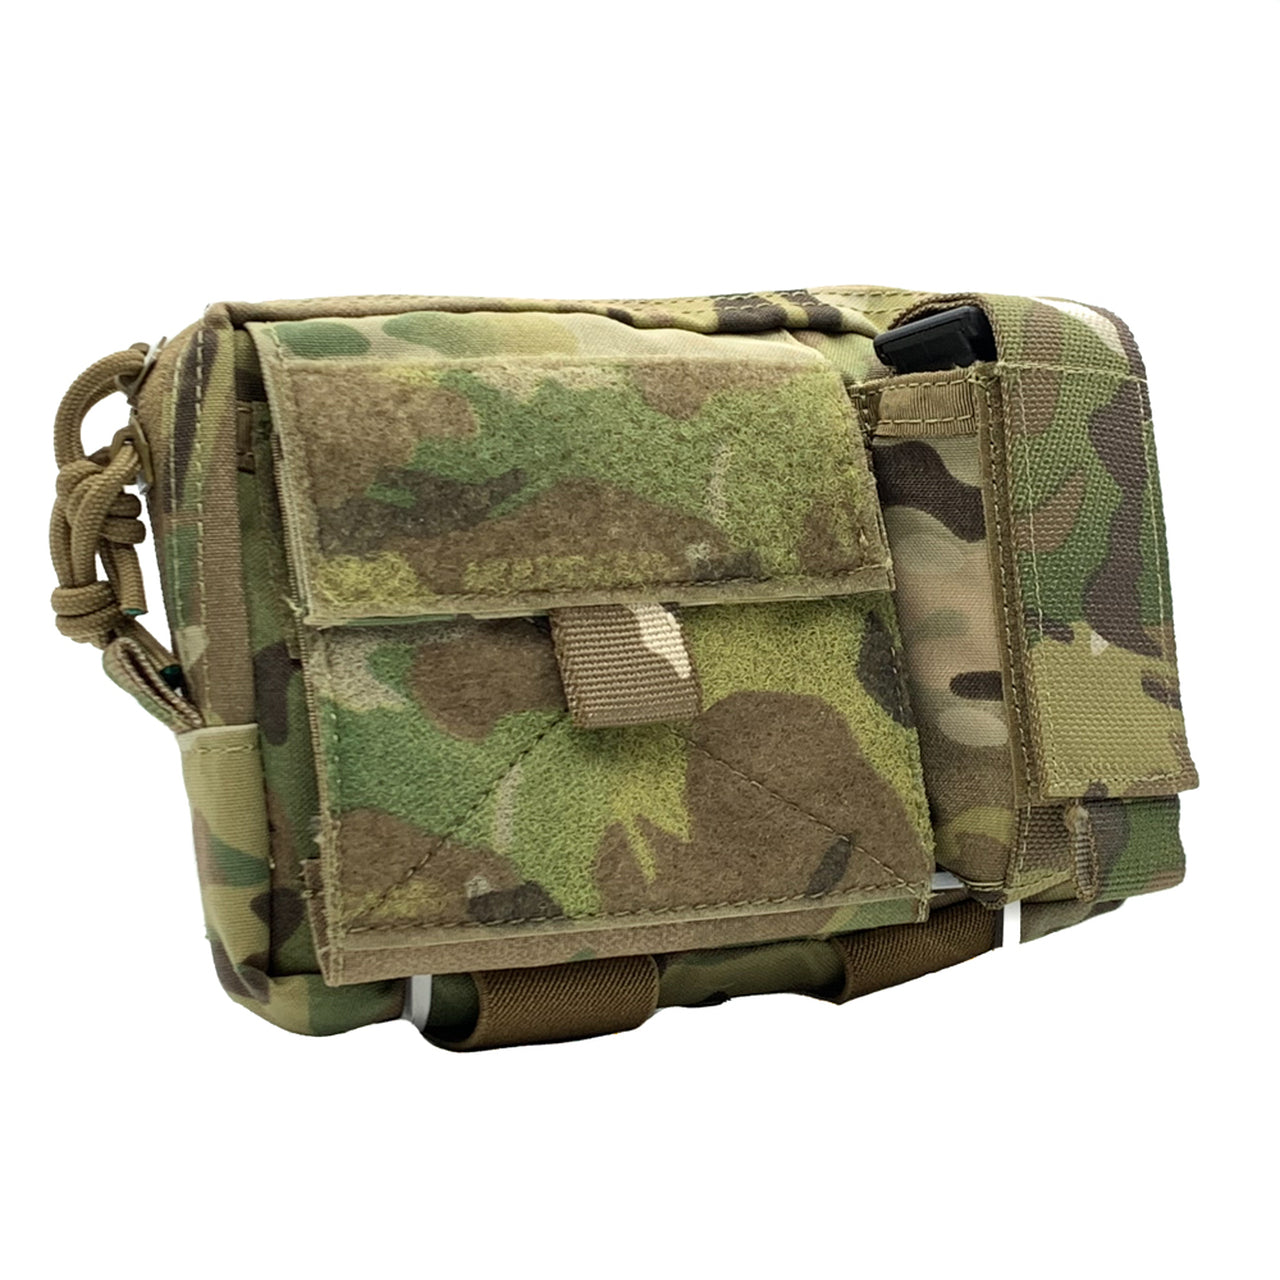 A Shellback Tactical Super Admin Pouch with a cell phone.